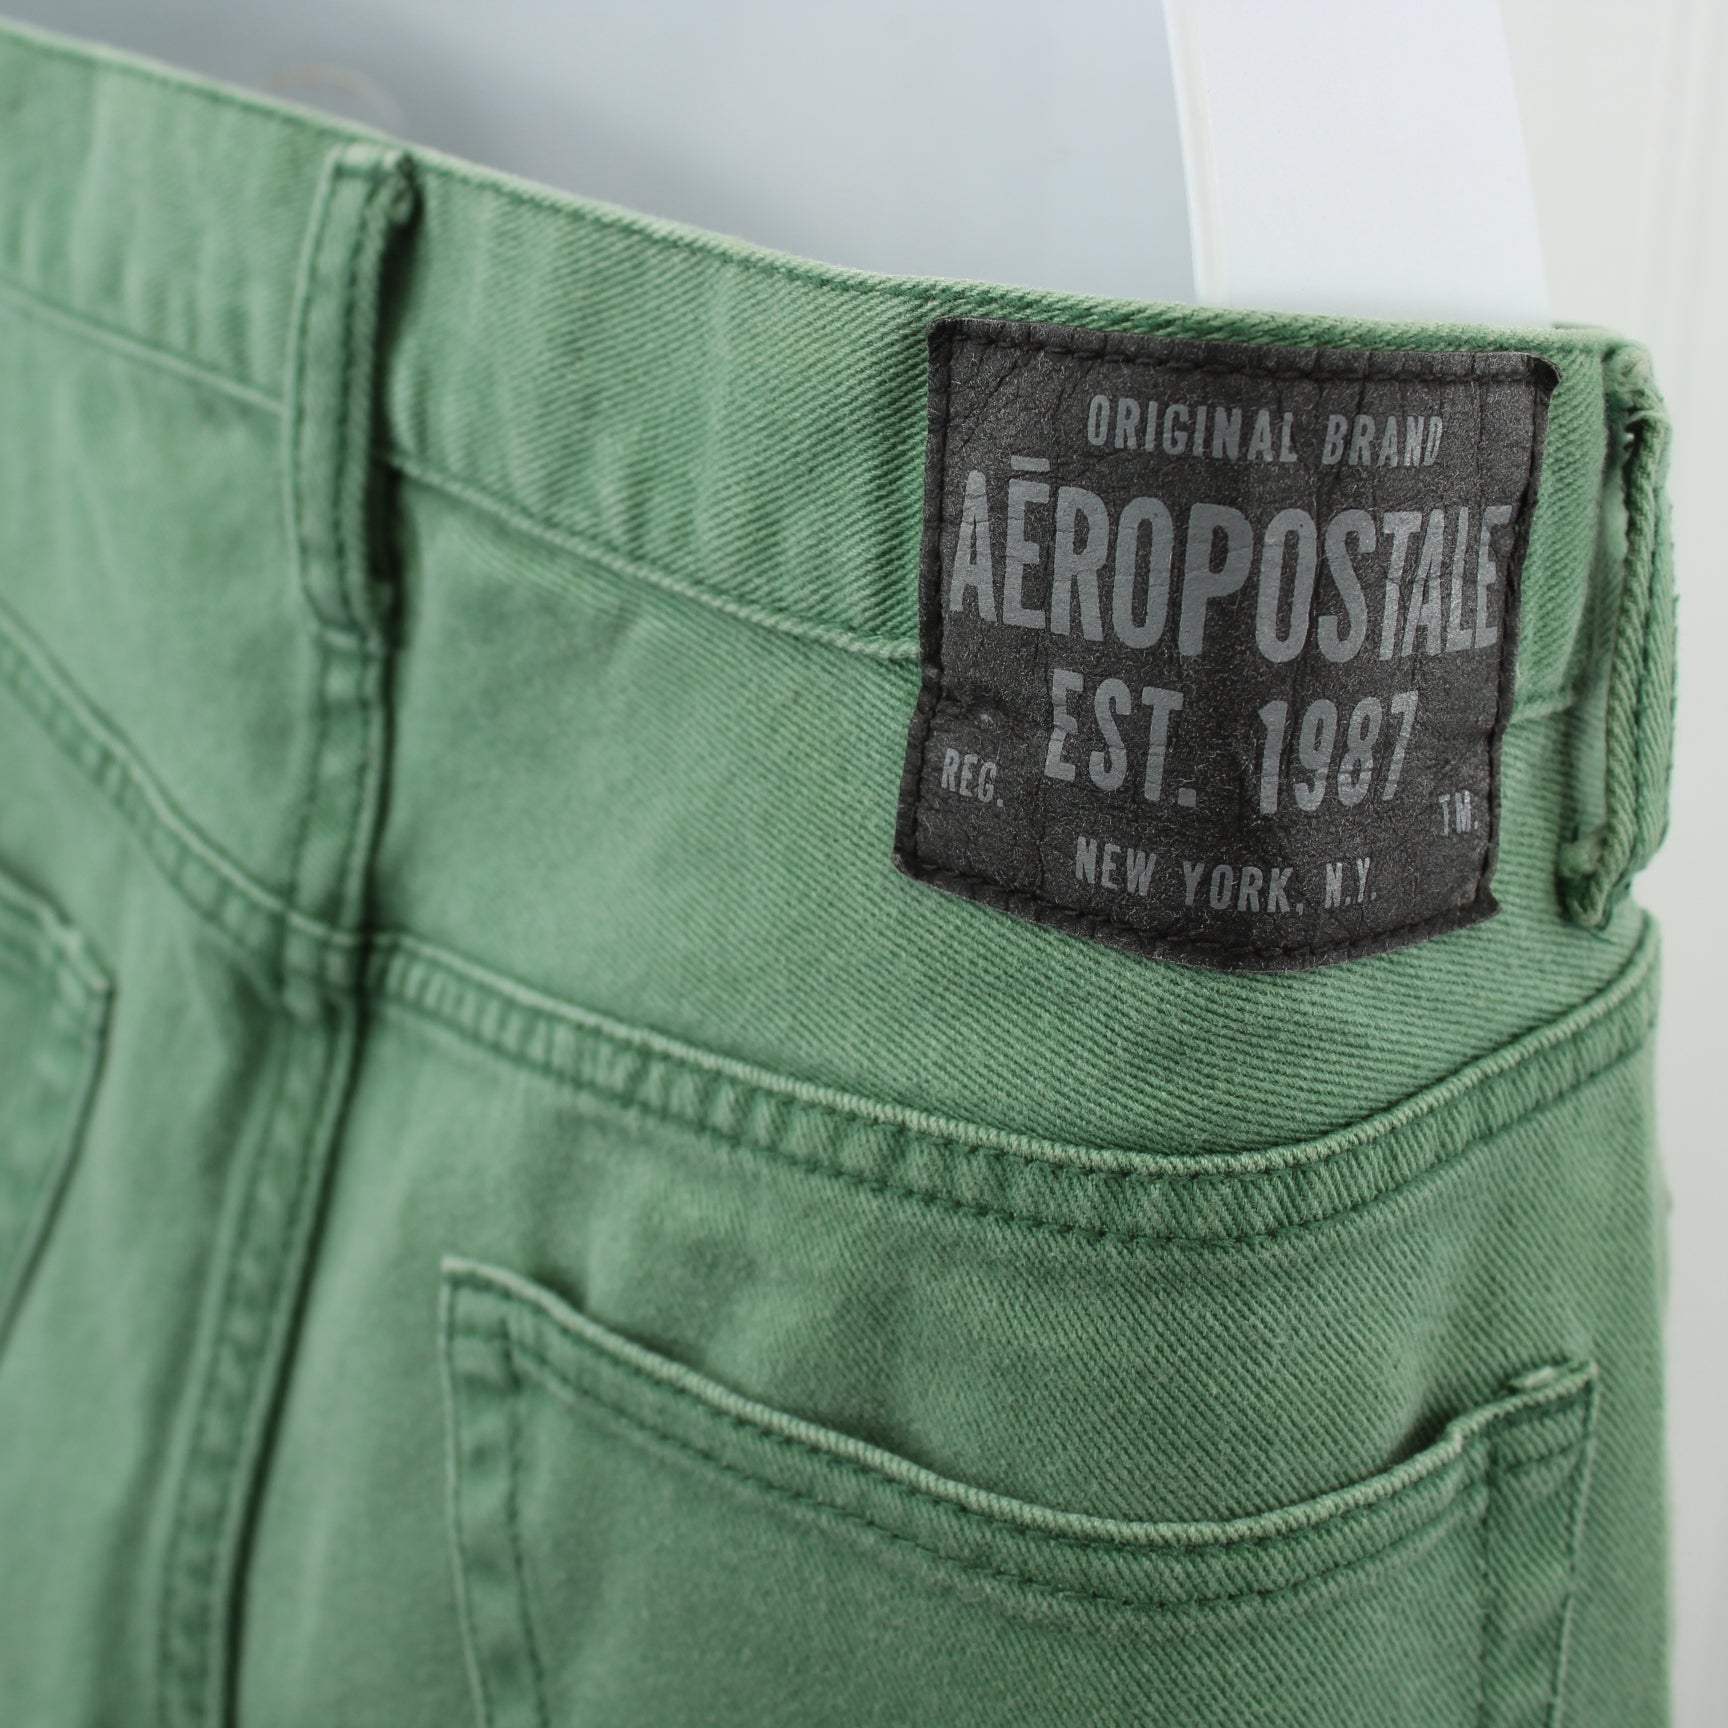 Aeropostale Bowery Vintage Slim Straight Jeans Green Cotton 98% Spandex 2% Size 32/34 all tags remain